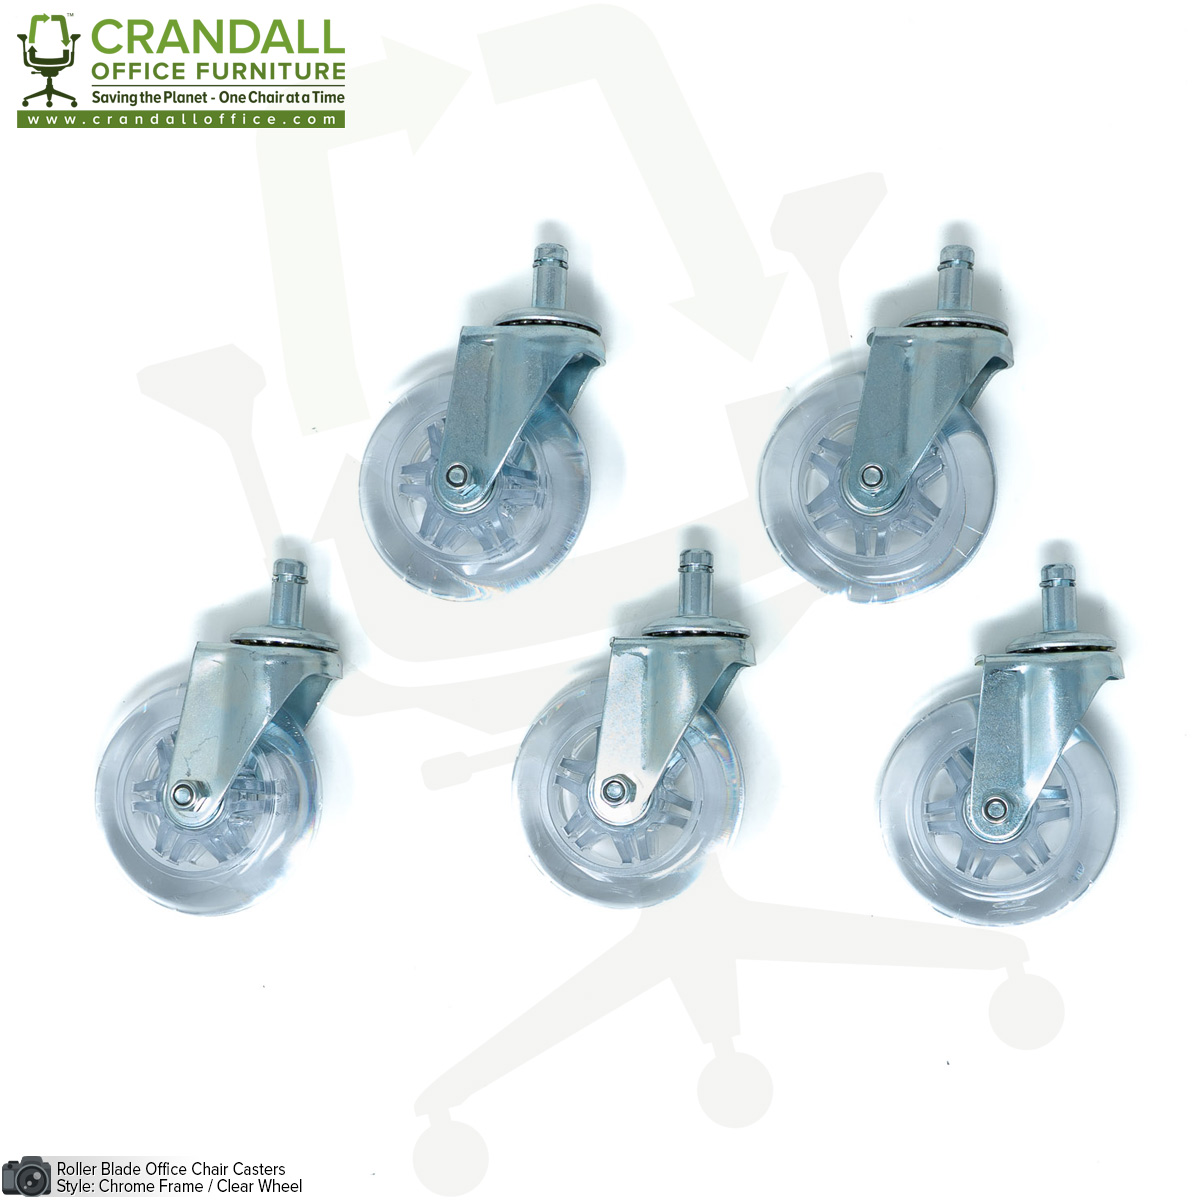 75mm (3 inch) Roller Blade Style Office Chair Casters - Crandall Office  Furniture